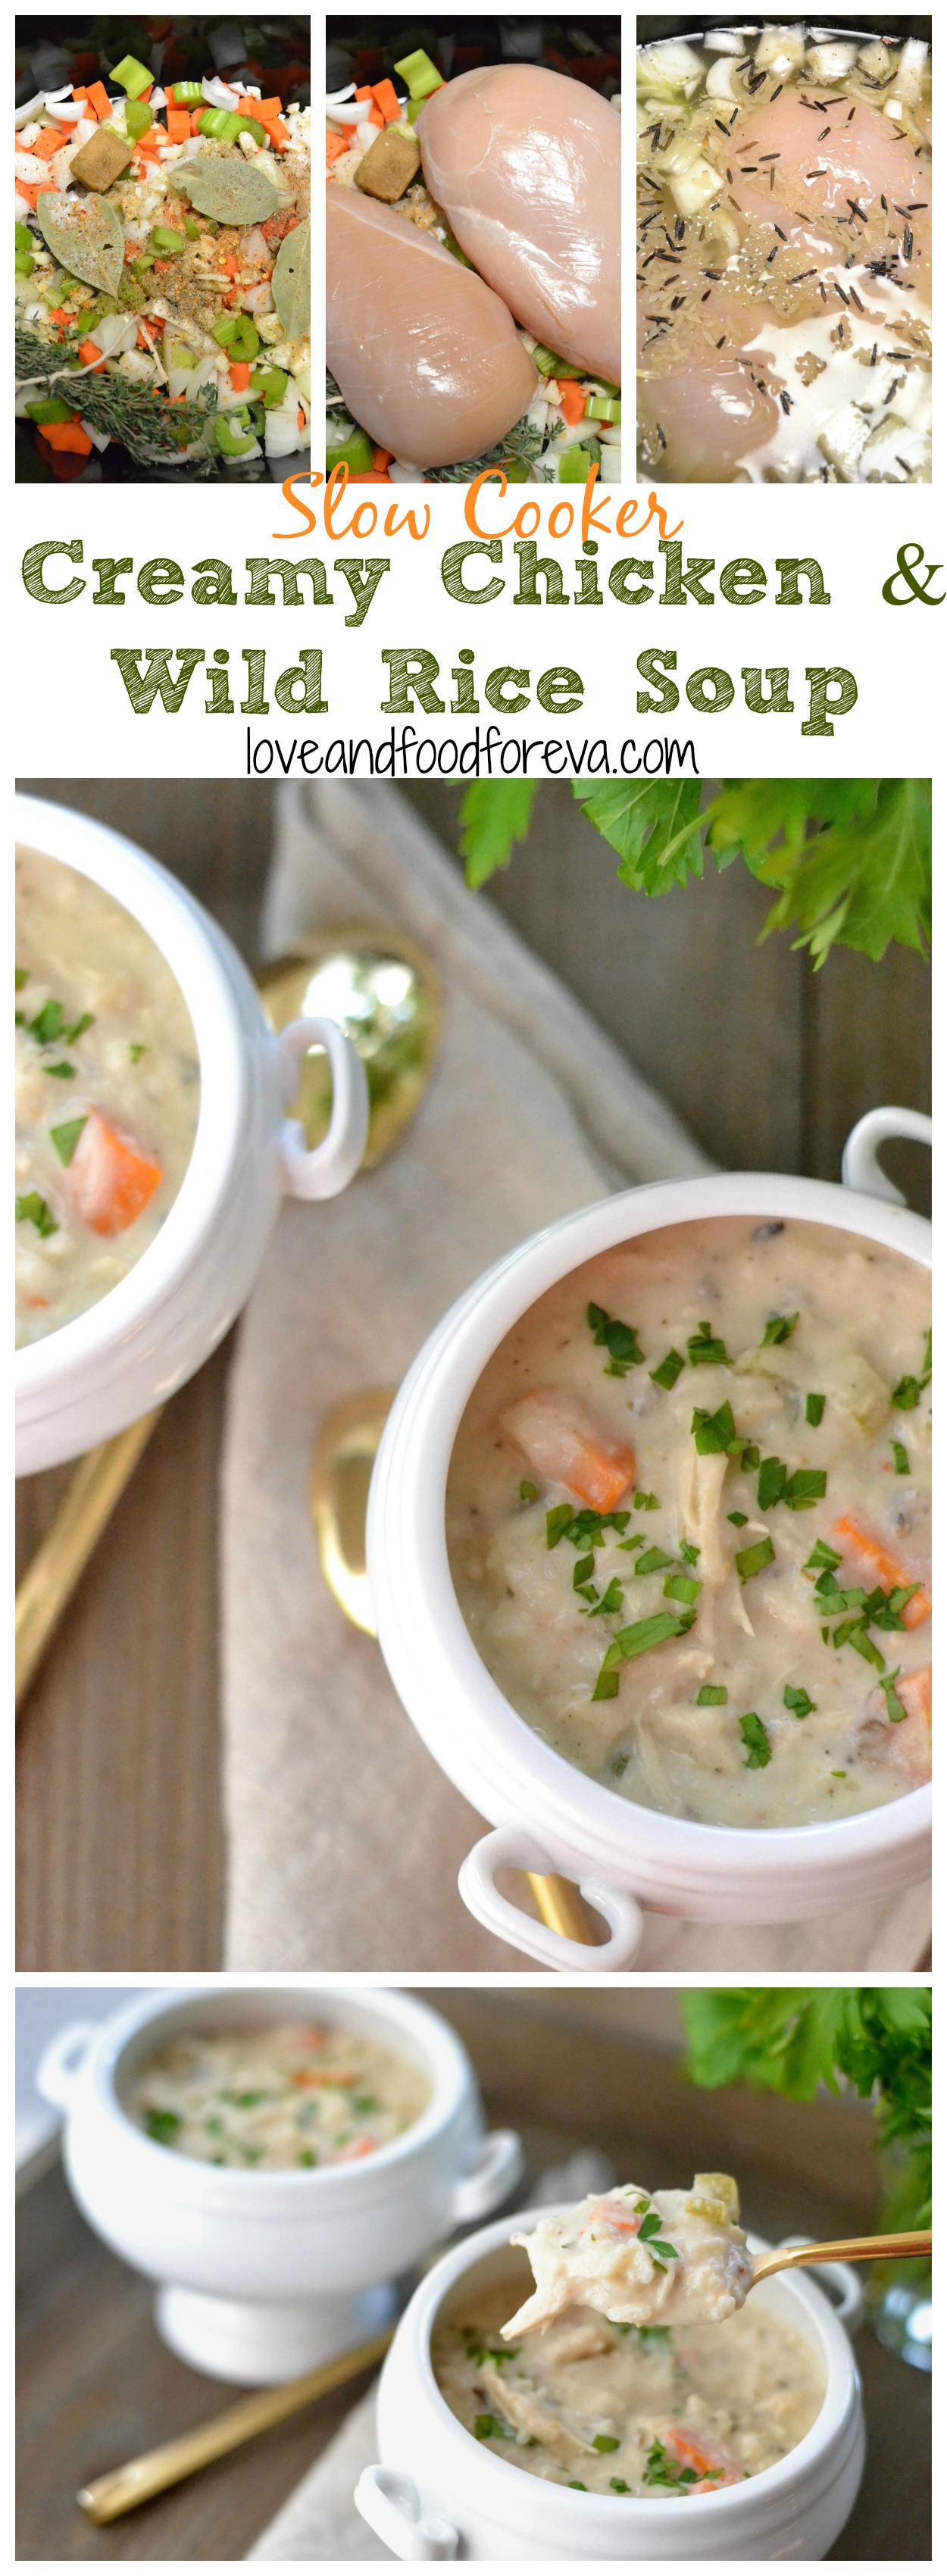 Slow Cooker Creamy Chicken and Wild Rice Soup - so easy and so comforting!